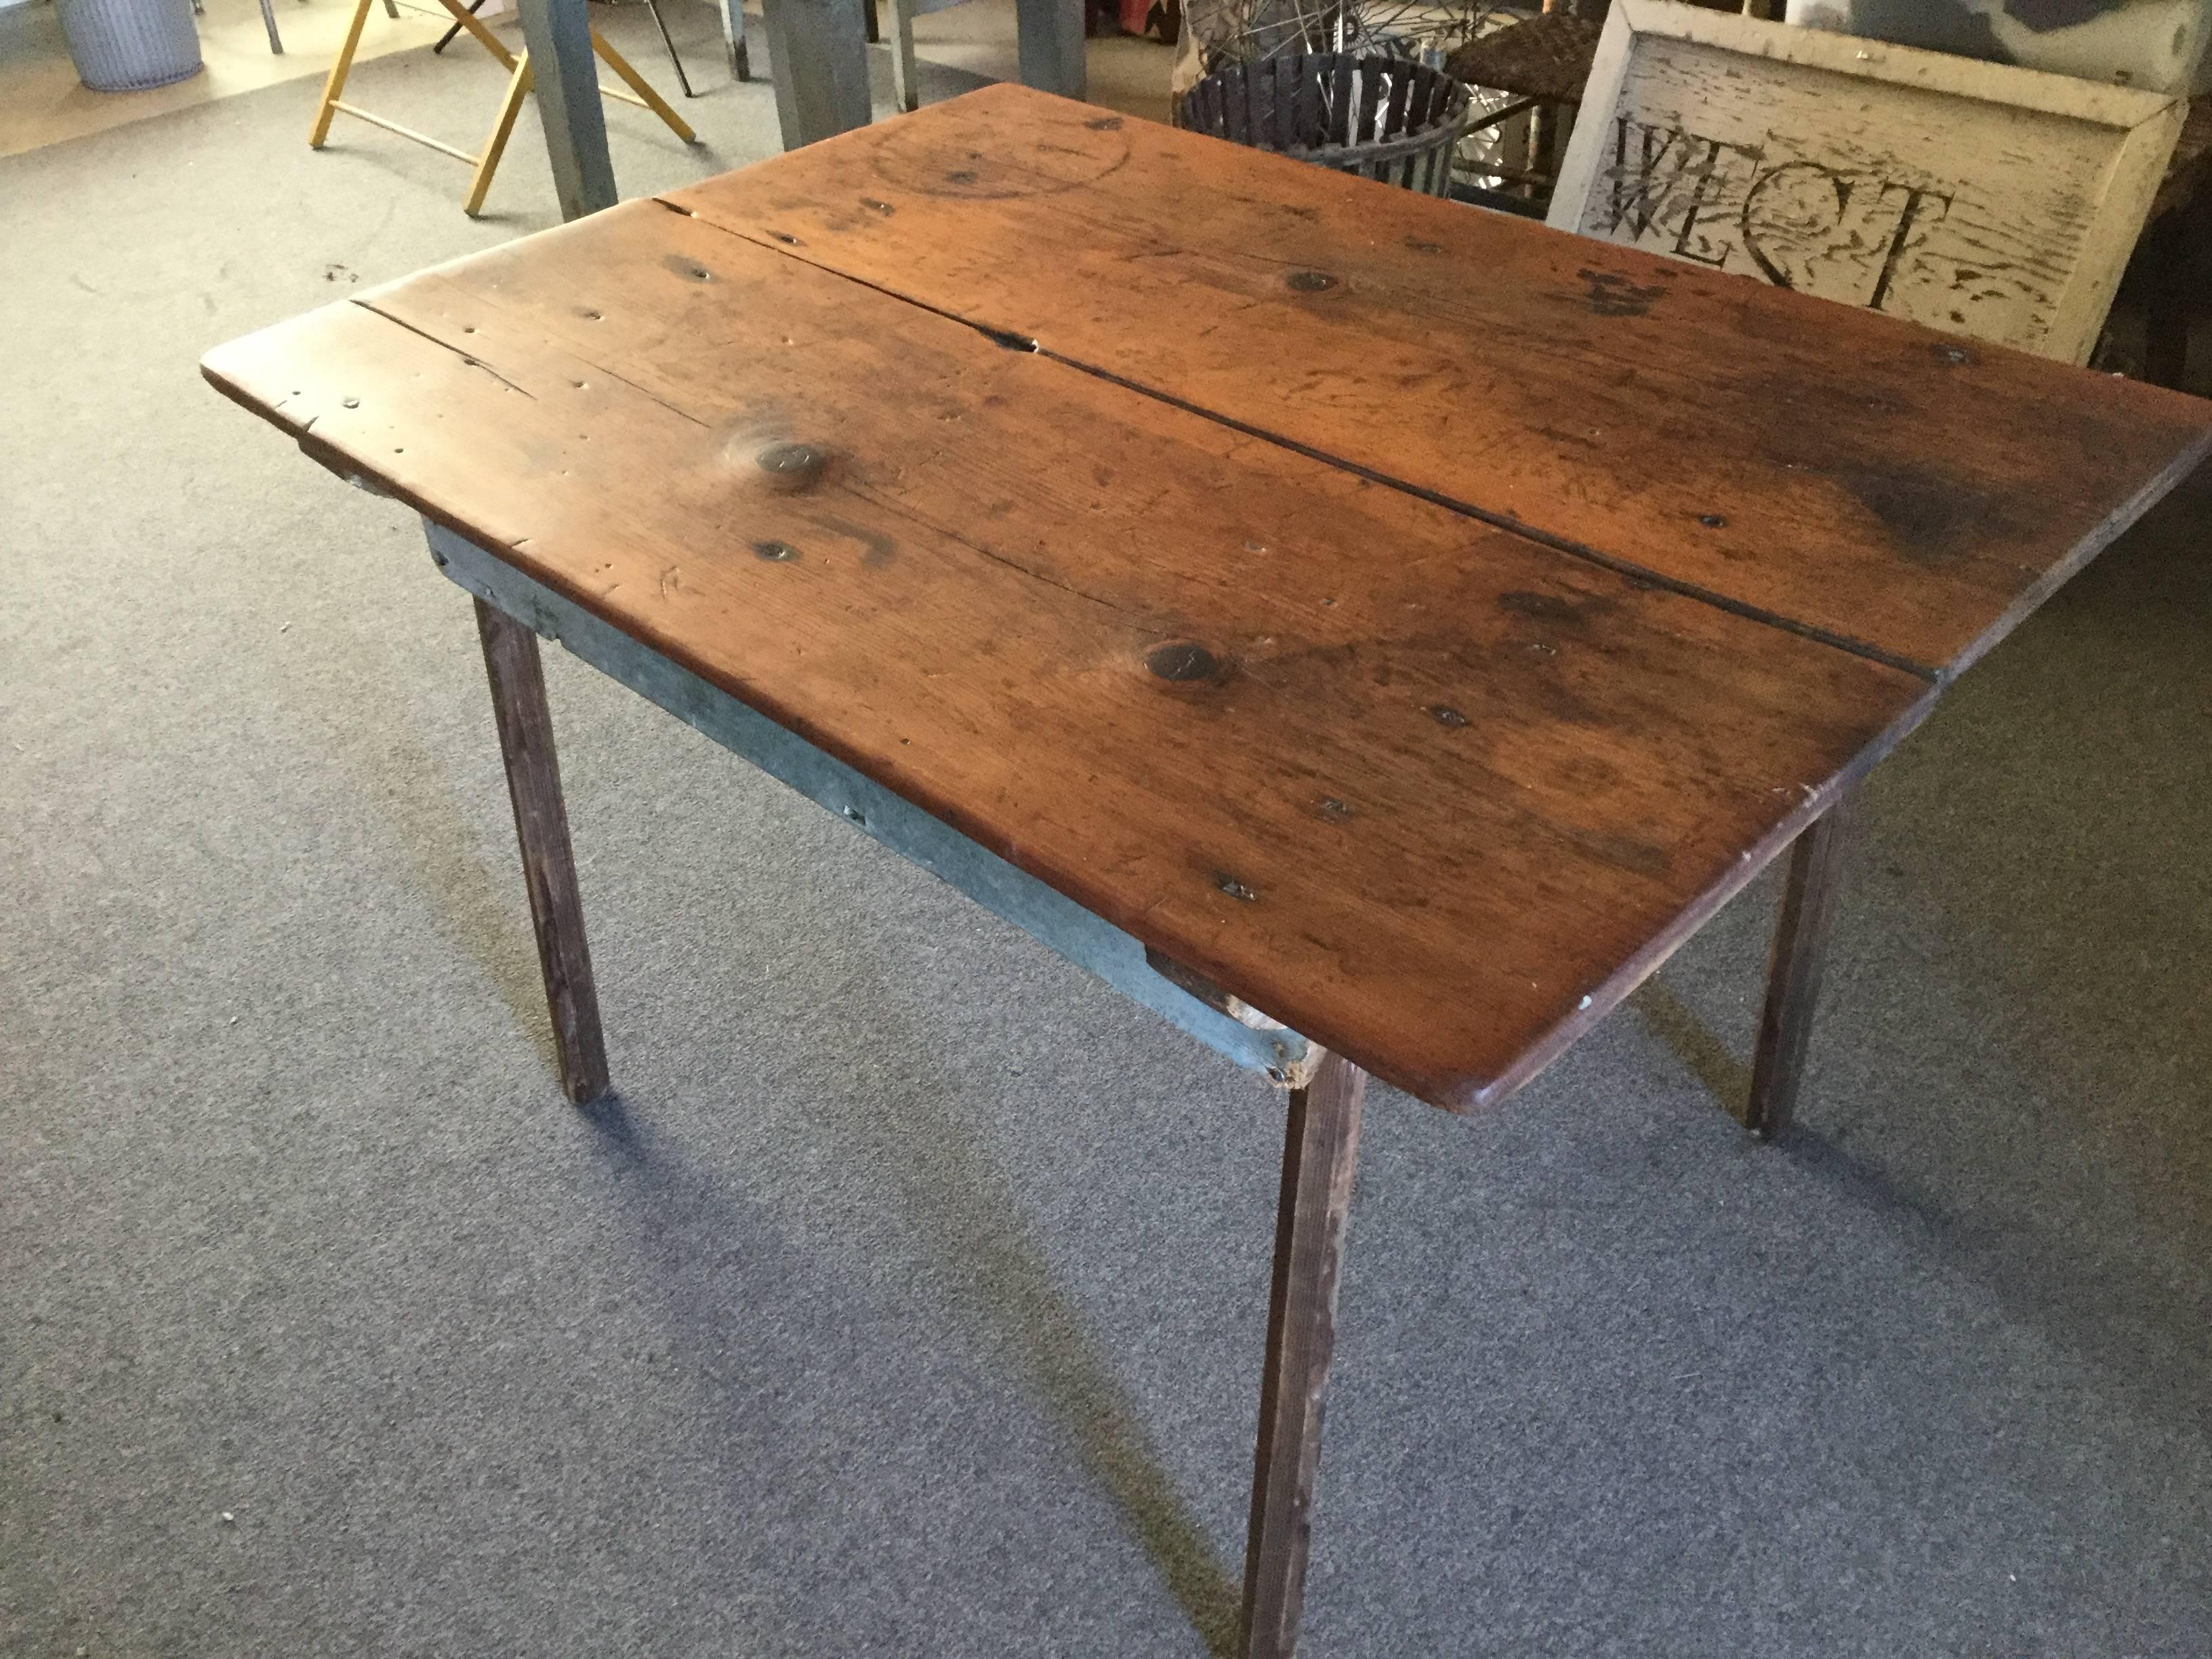 19th century American primitive table with wide boards for a top. The wide boards are pine and probably from the 18th century. Lumber this size was once known as the Kings Lumber, because any lumber this wide was supposed to belong to the King of